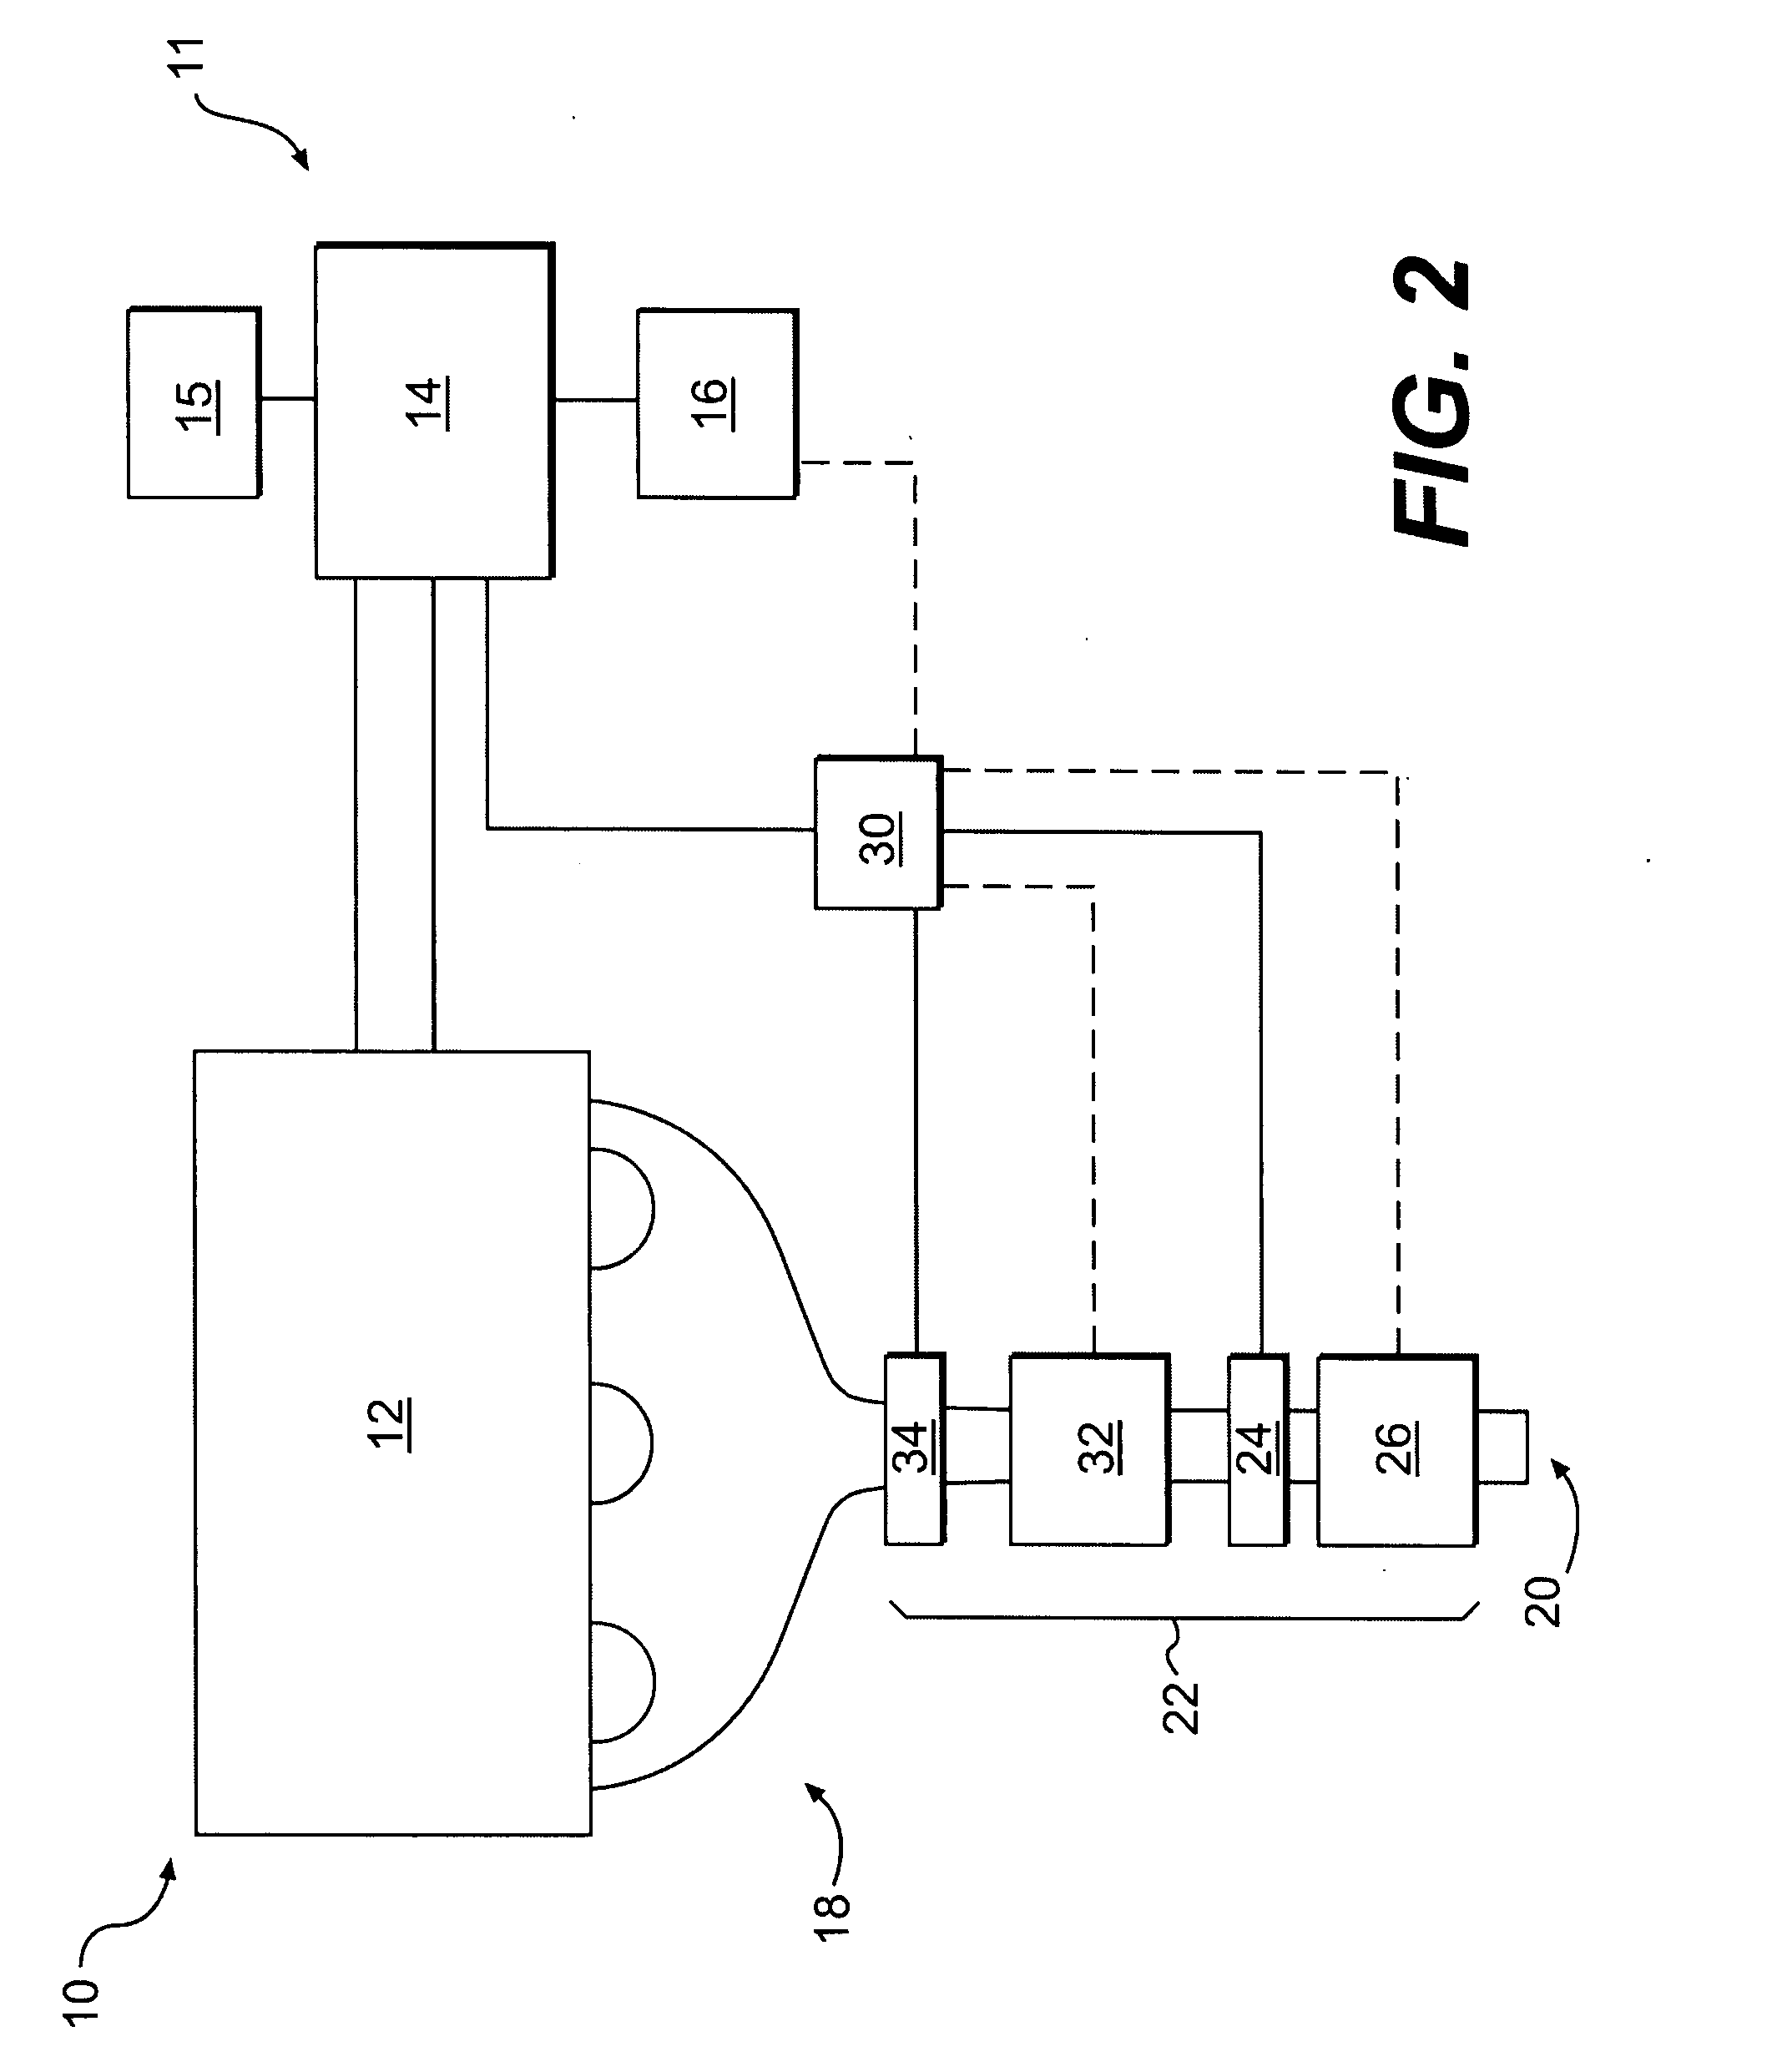 Catalyst temperature control system for a hybrid engine